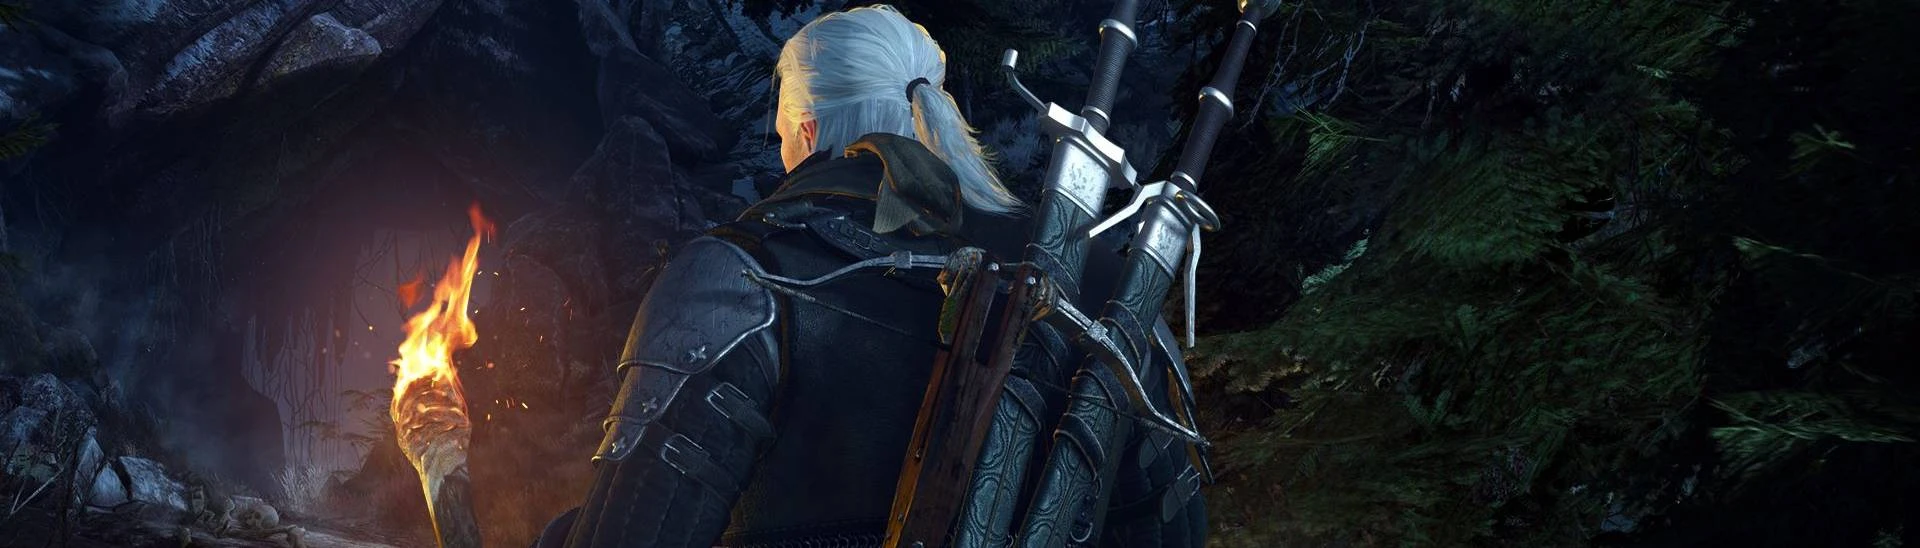 The Witcher 3's next-gen update may look better, but you'll pay for it in  broken mods